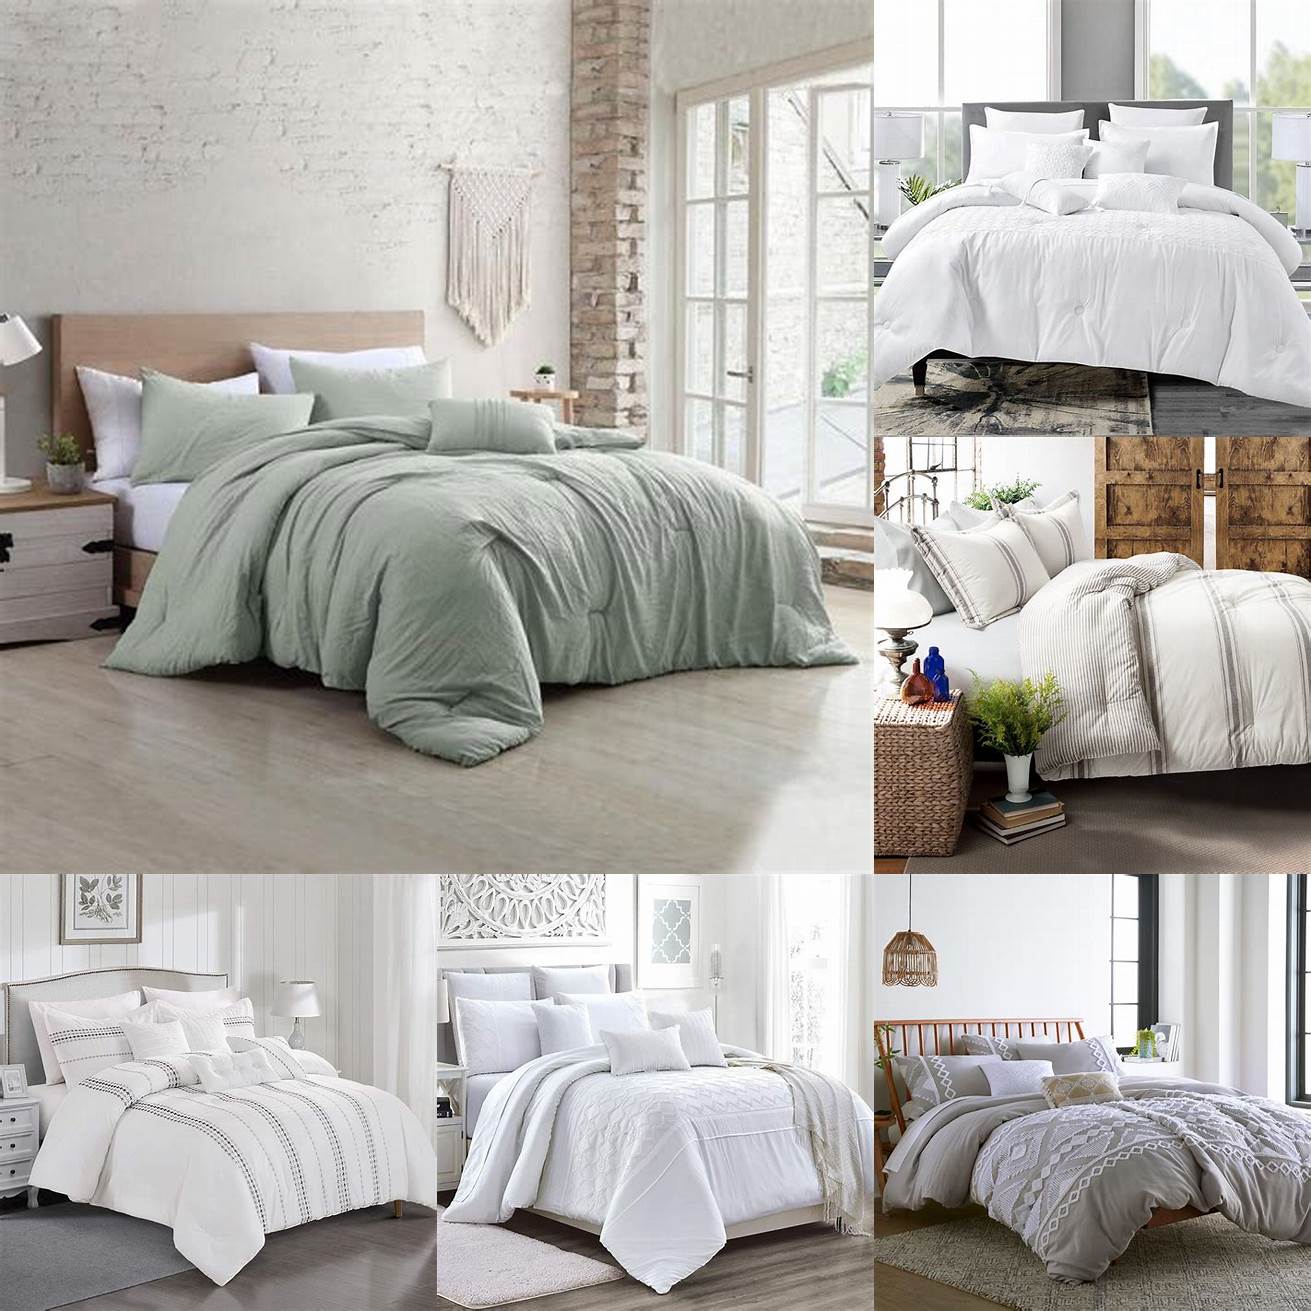 A sleek and minimalist comforter is a popular choice in modern bedding